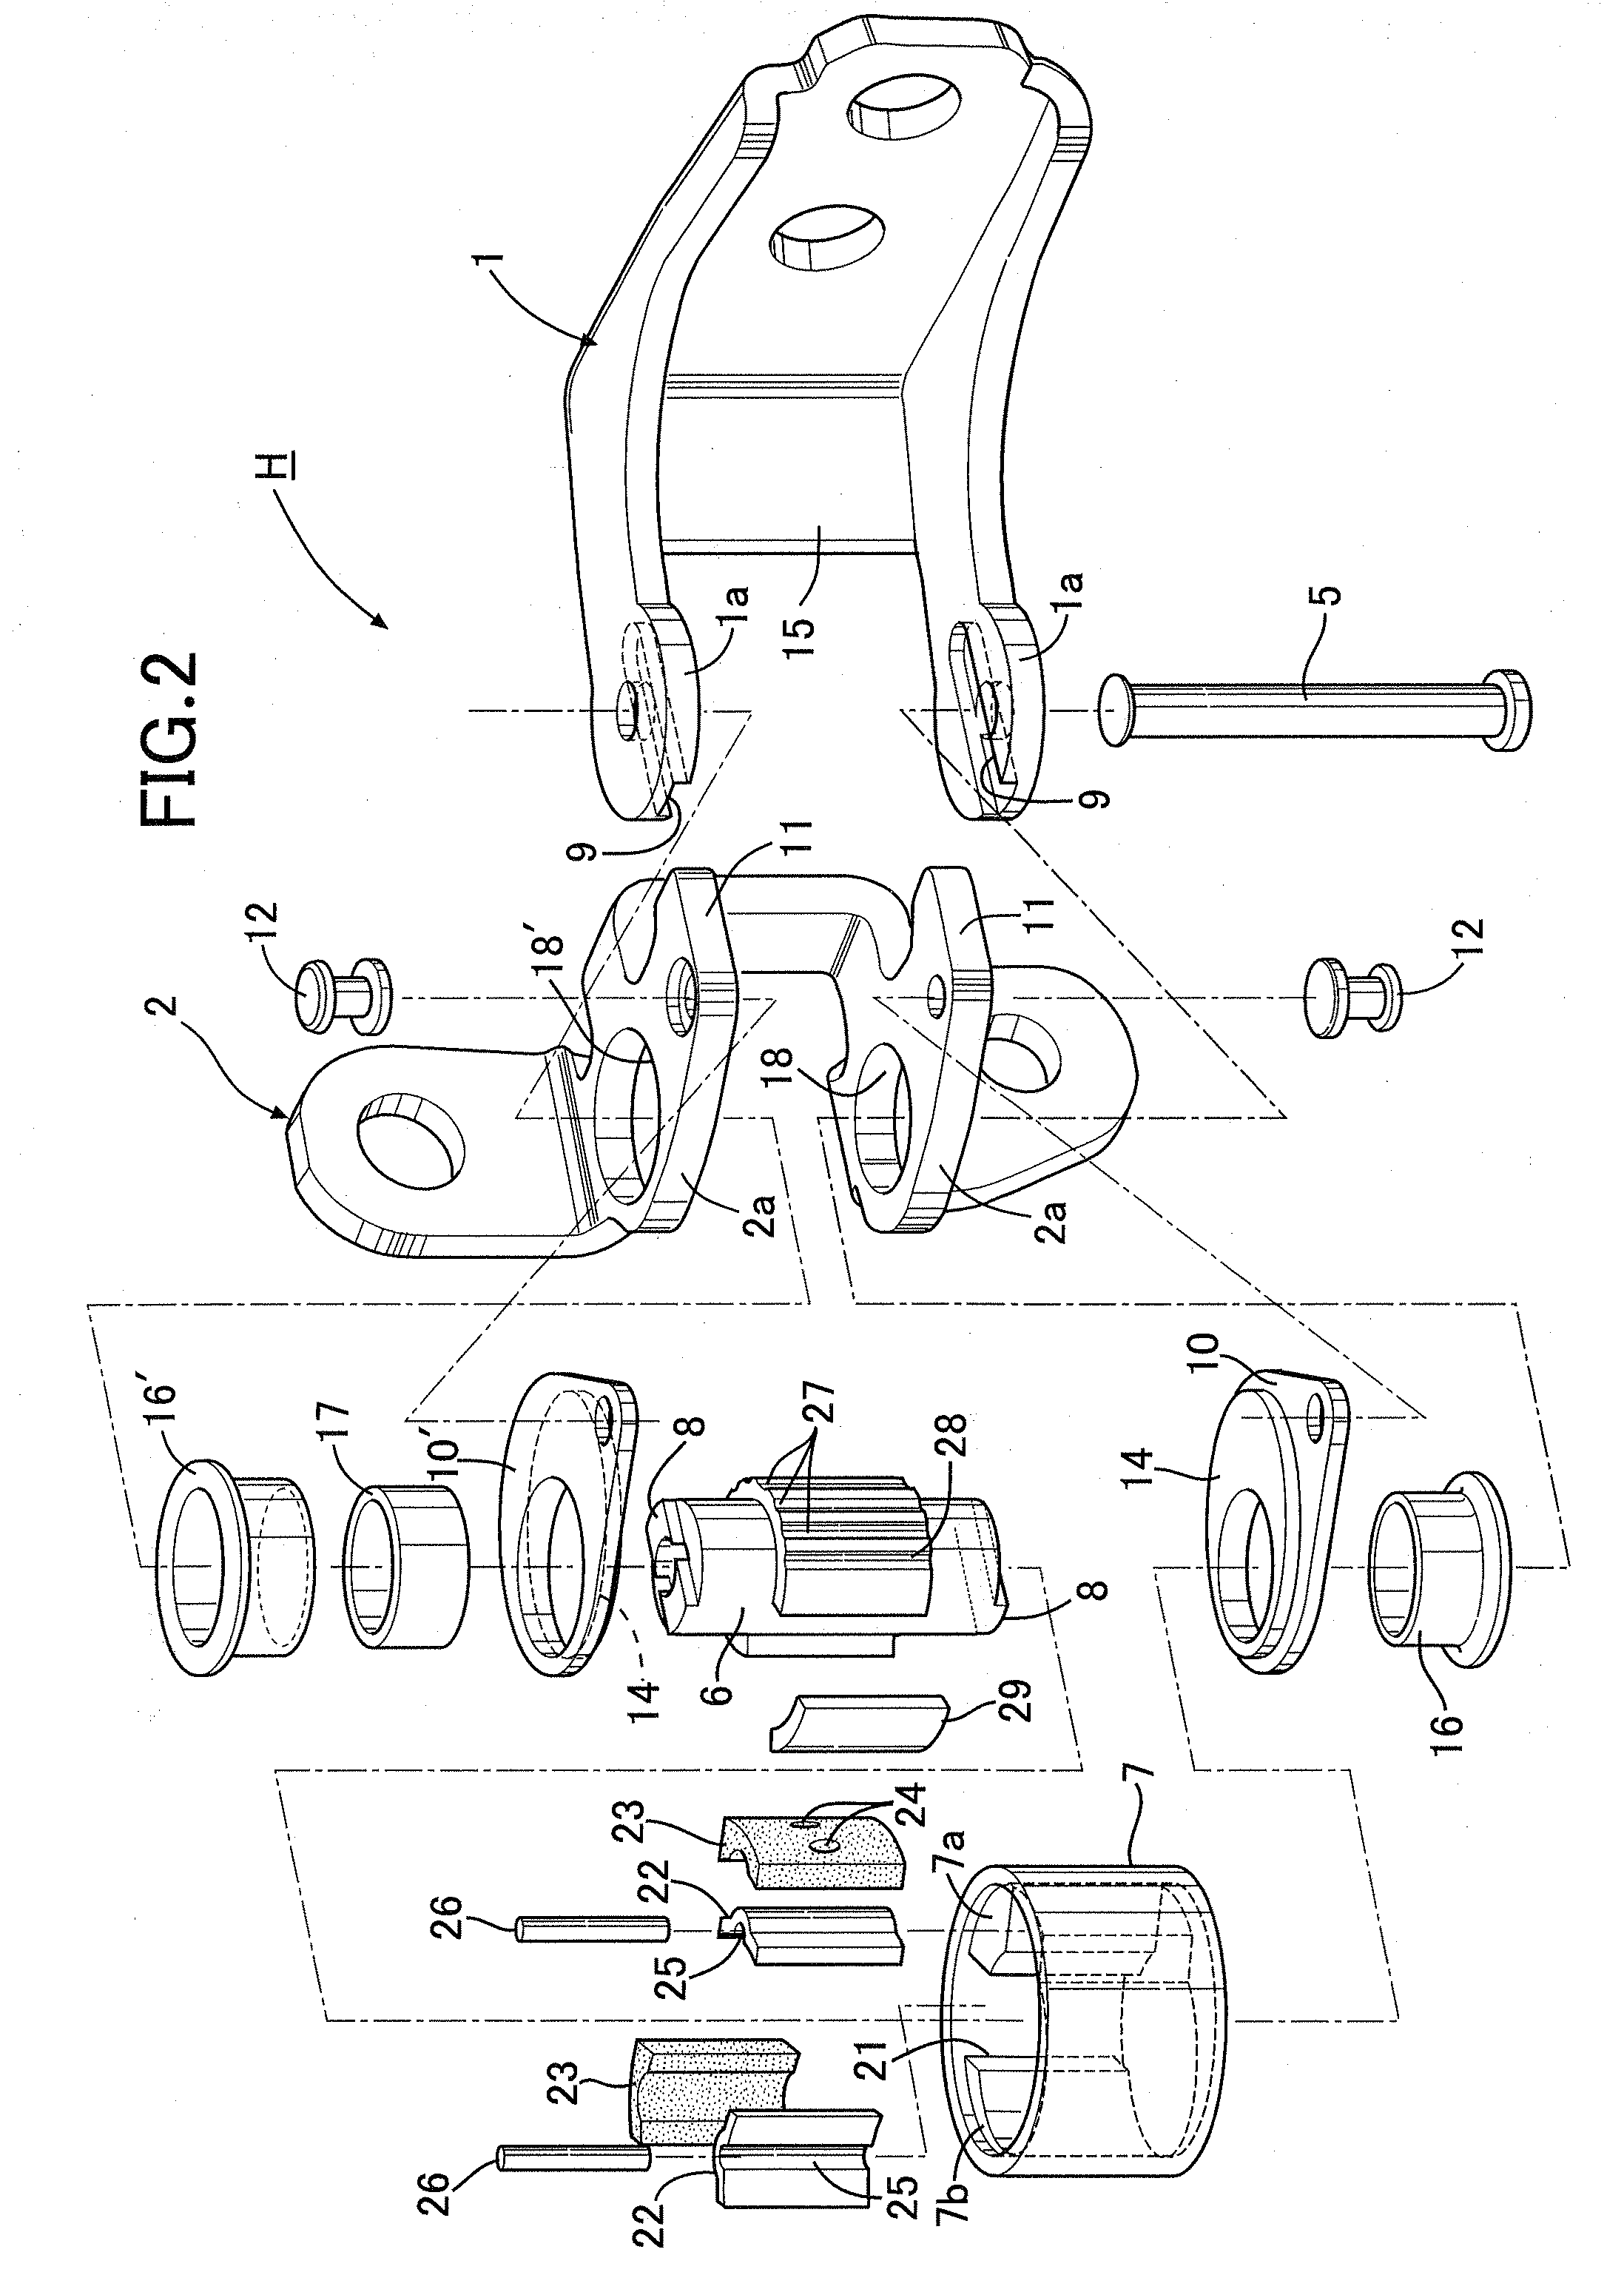 Checker-equipped door hinge device for vehicle